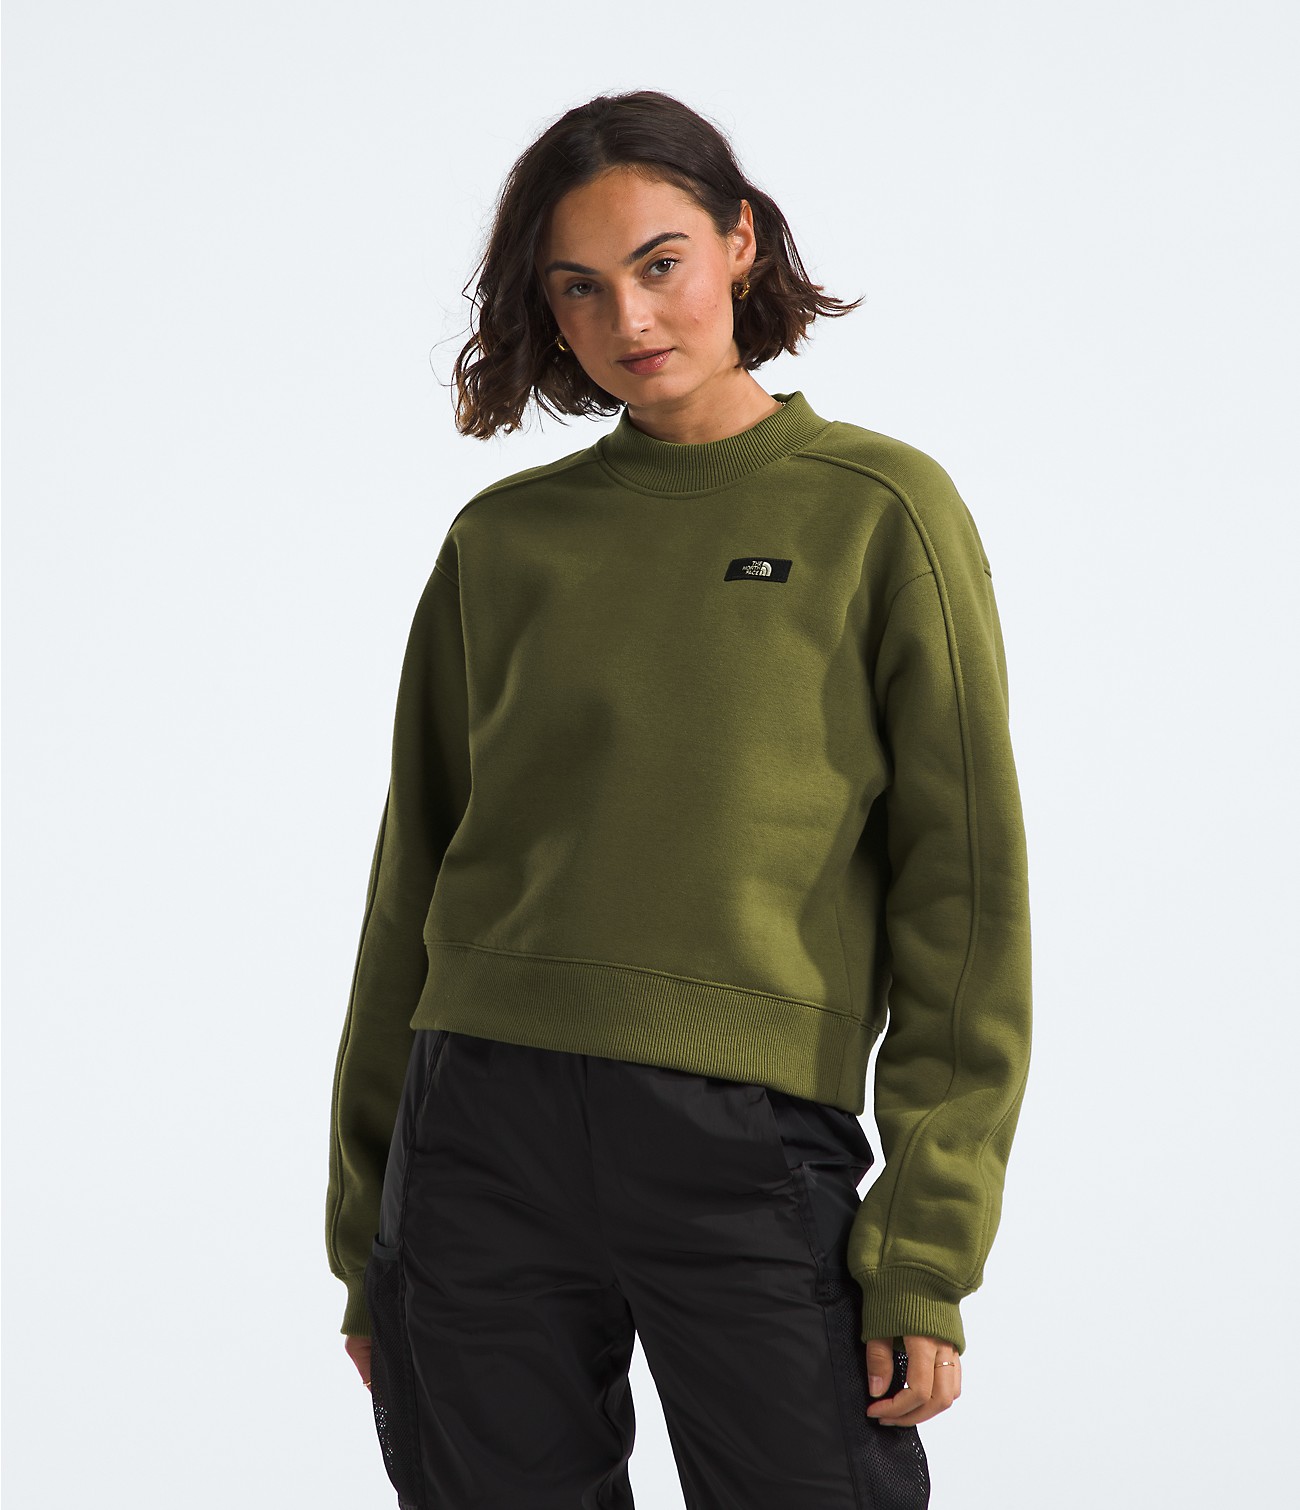 Women’s Heavyweight Box Fit Crew | The North Face